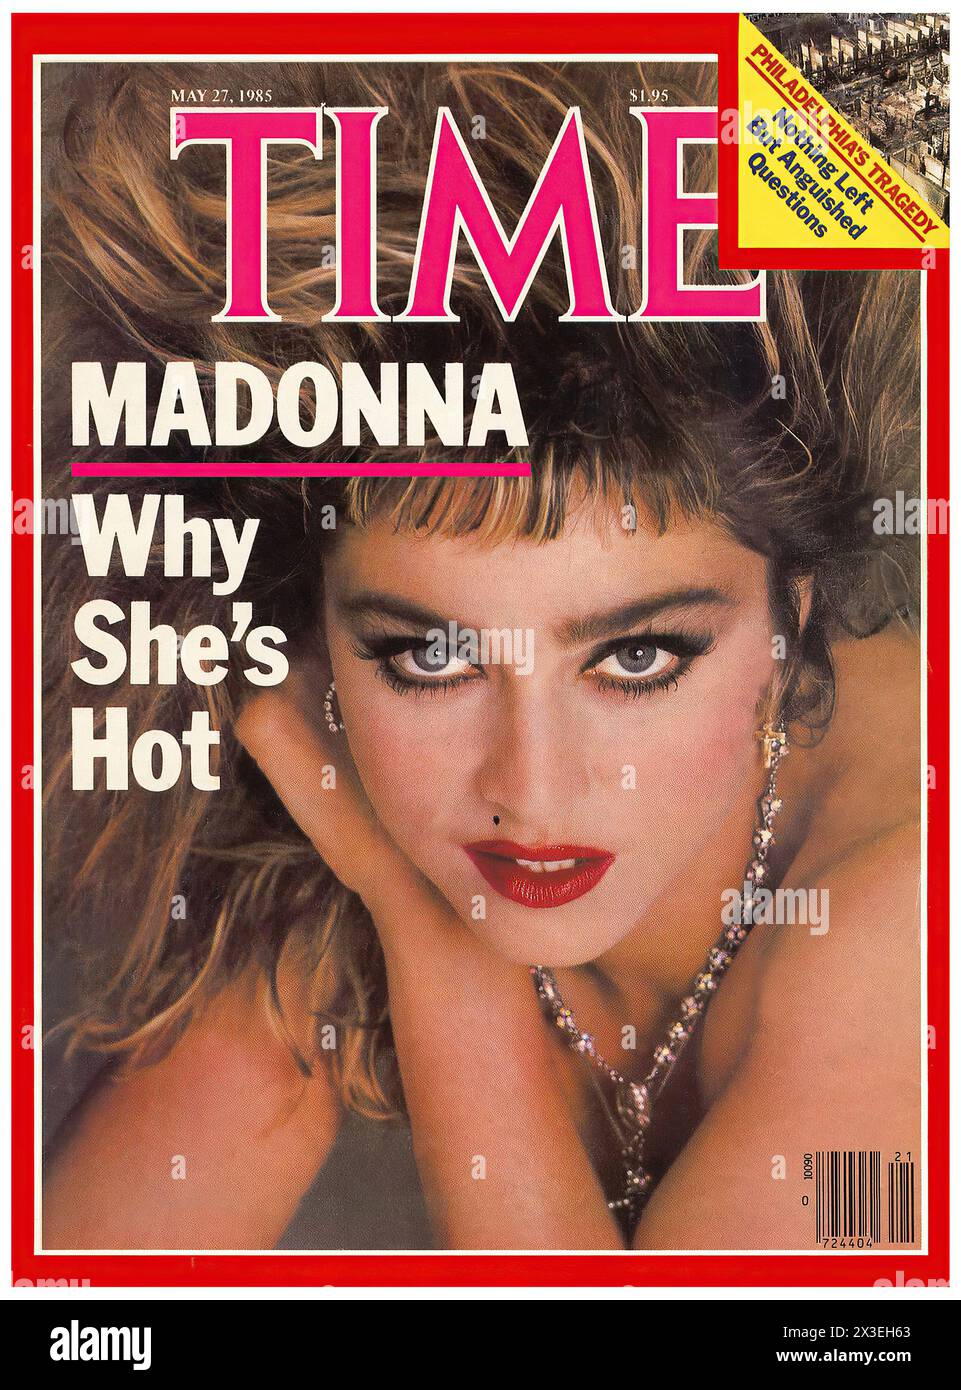 Madonna, Why She's Hot  - Vintage TIME Magazine cover 1985 Stock Photo